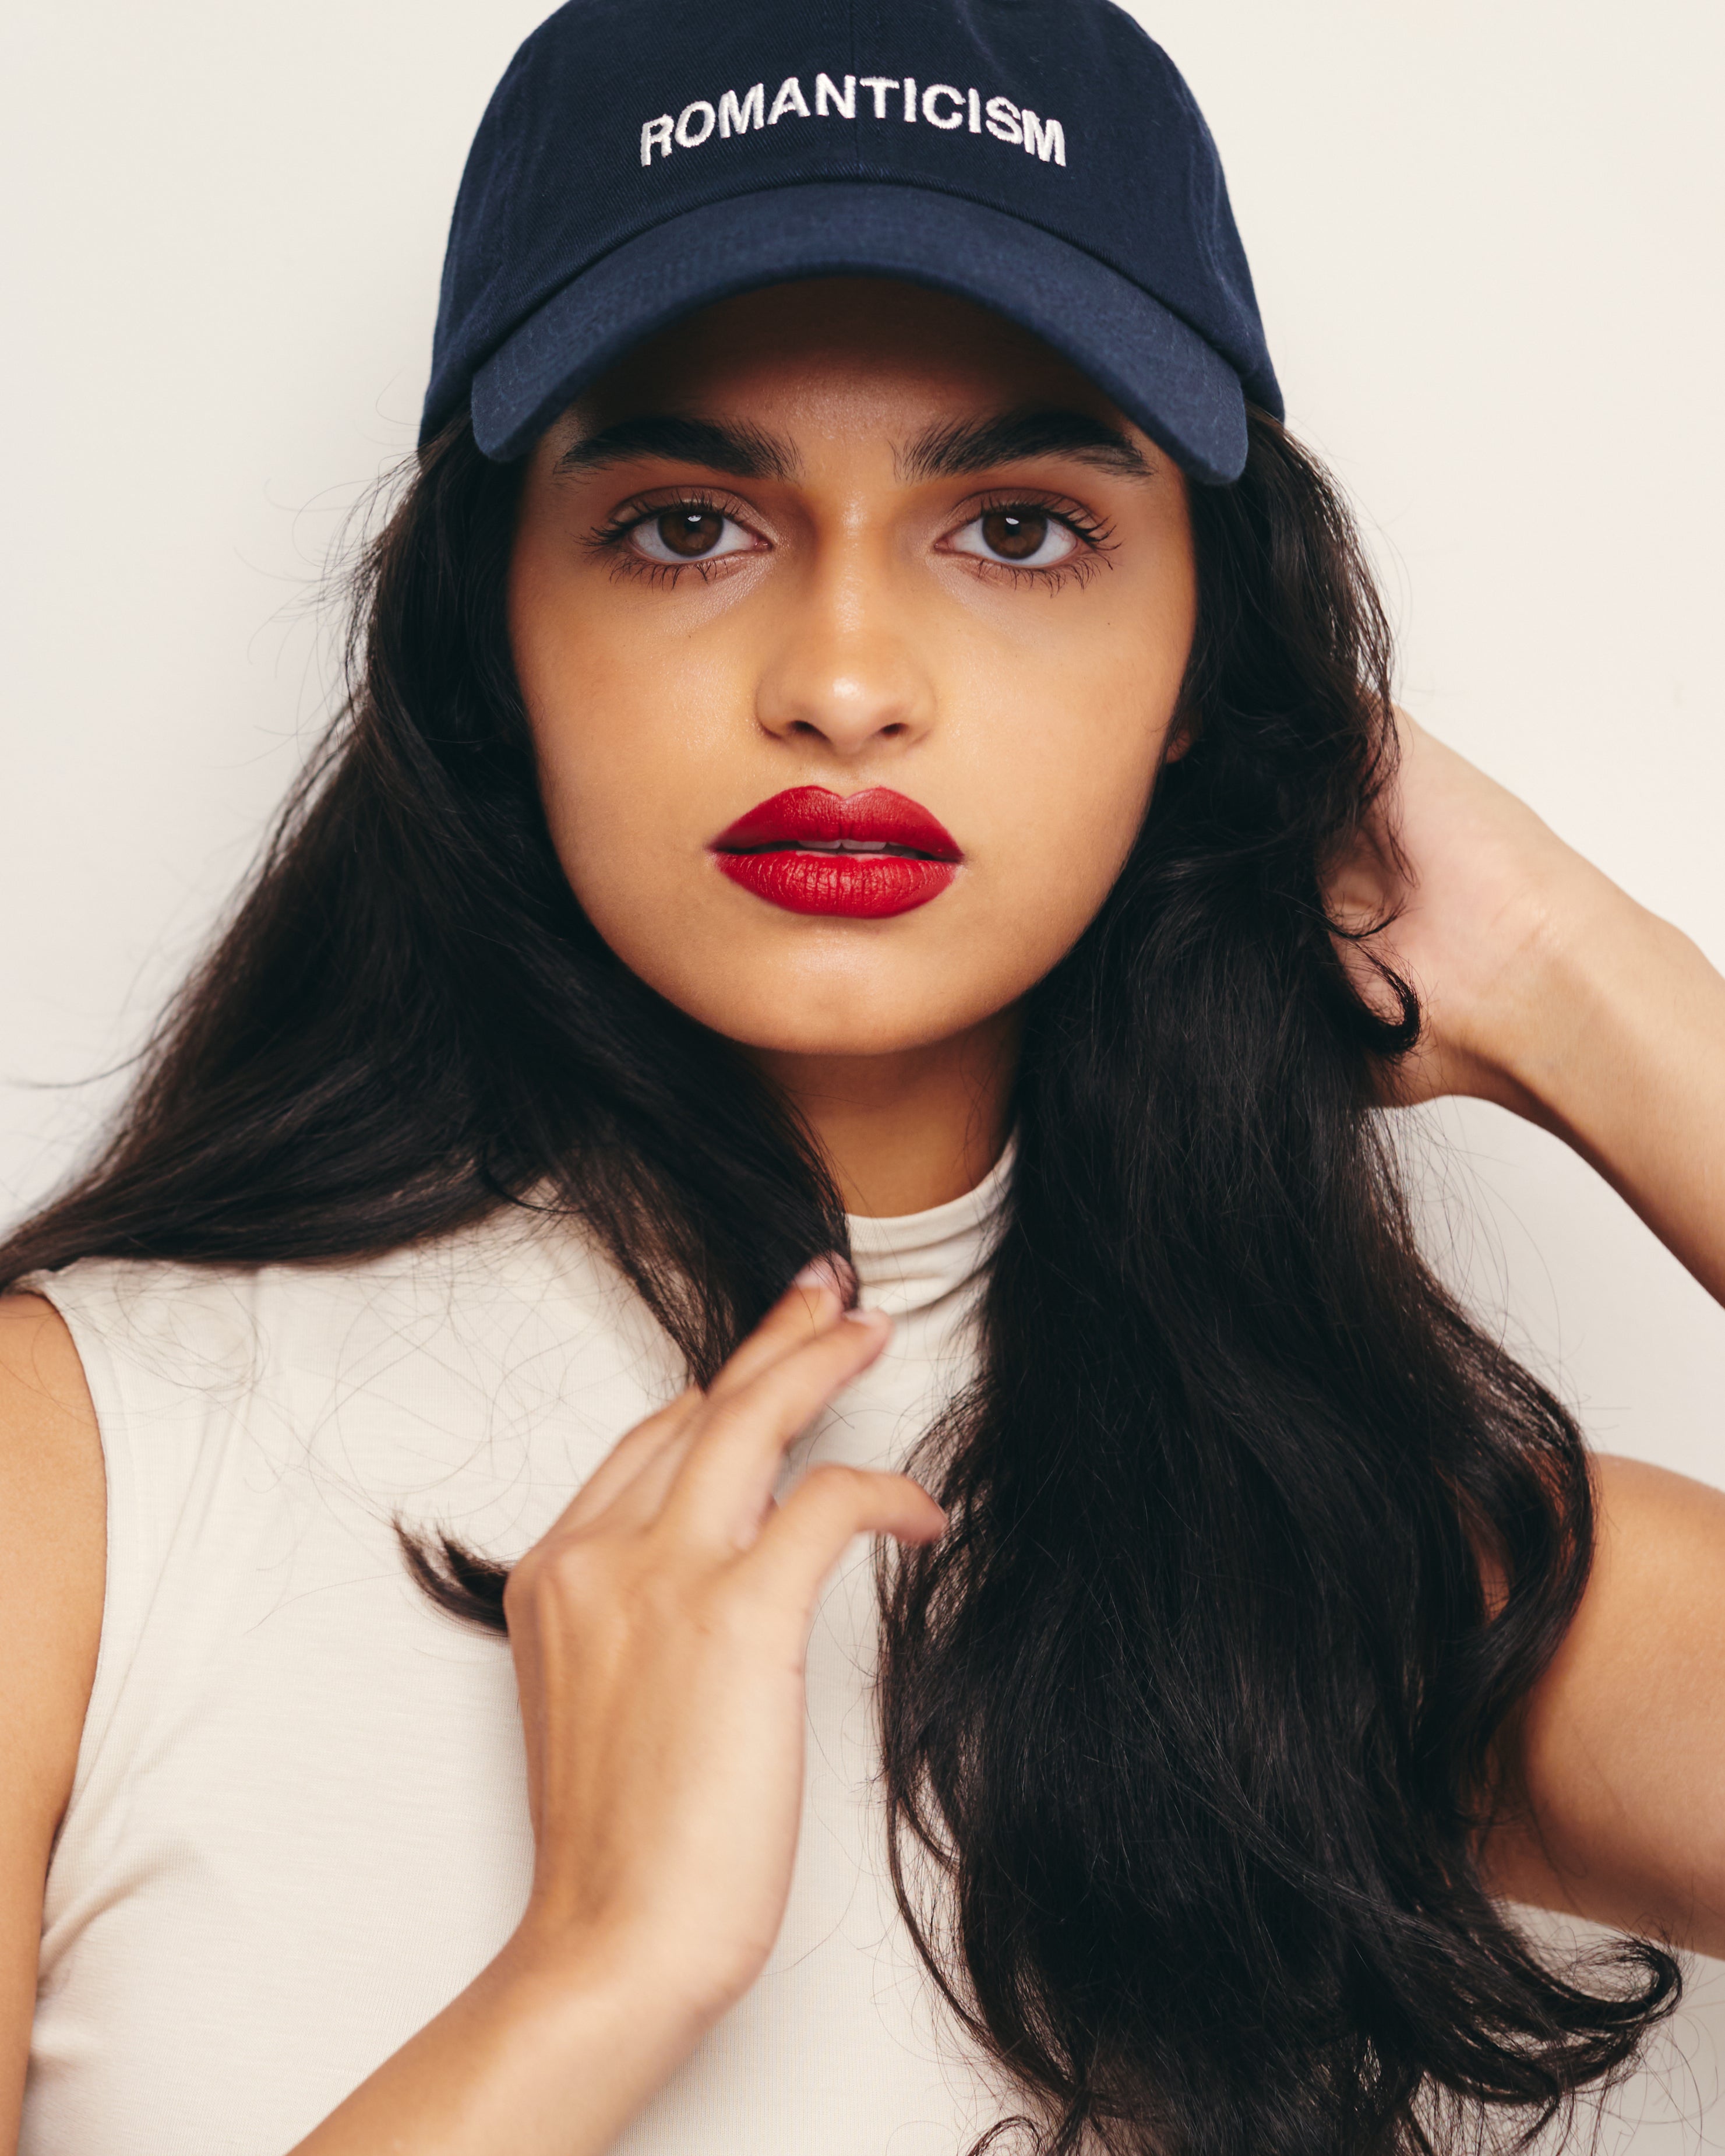 Mira Bhat wears Outsider Supply Navy Blue Dad Hat with Romanticism Art Movement Embroidery Text.